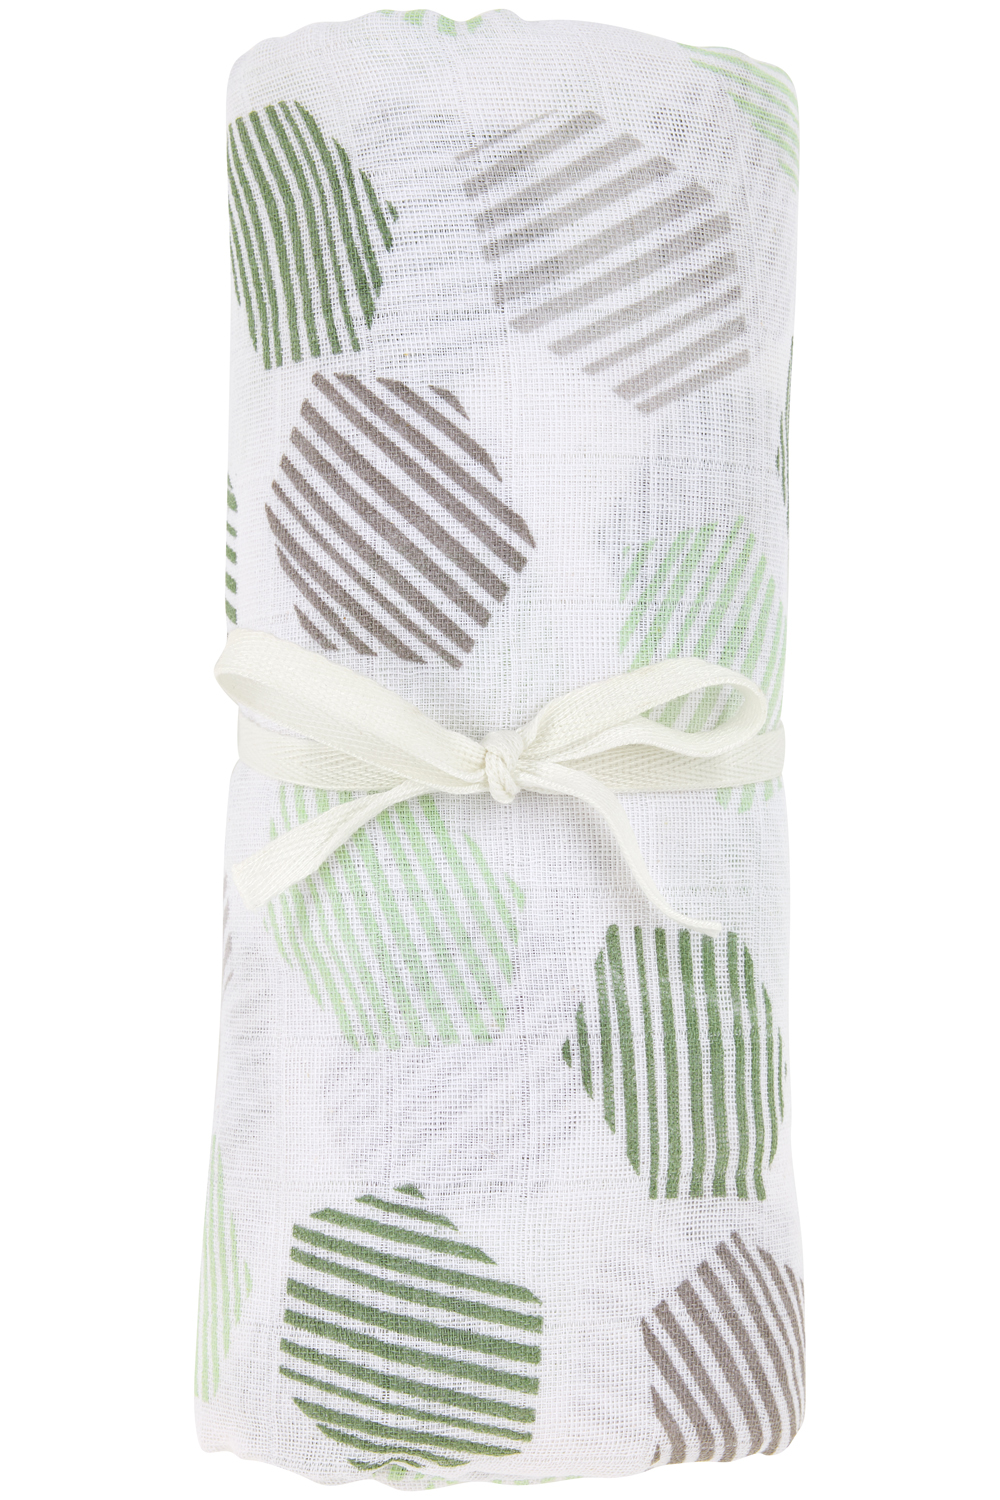 Swaddle XL musselin Honeycomb - forest green - 140x200cm